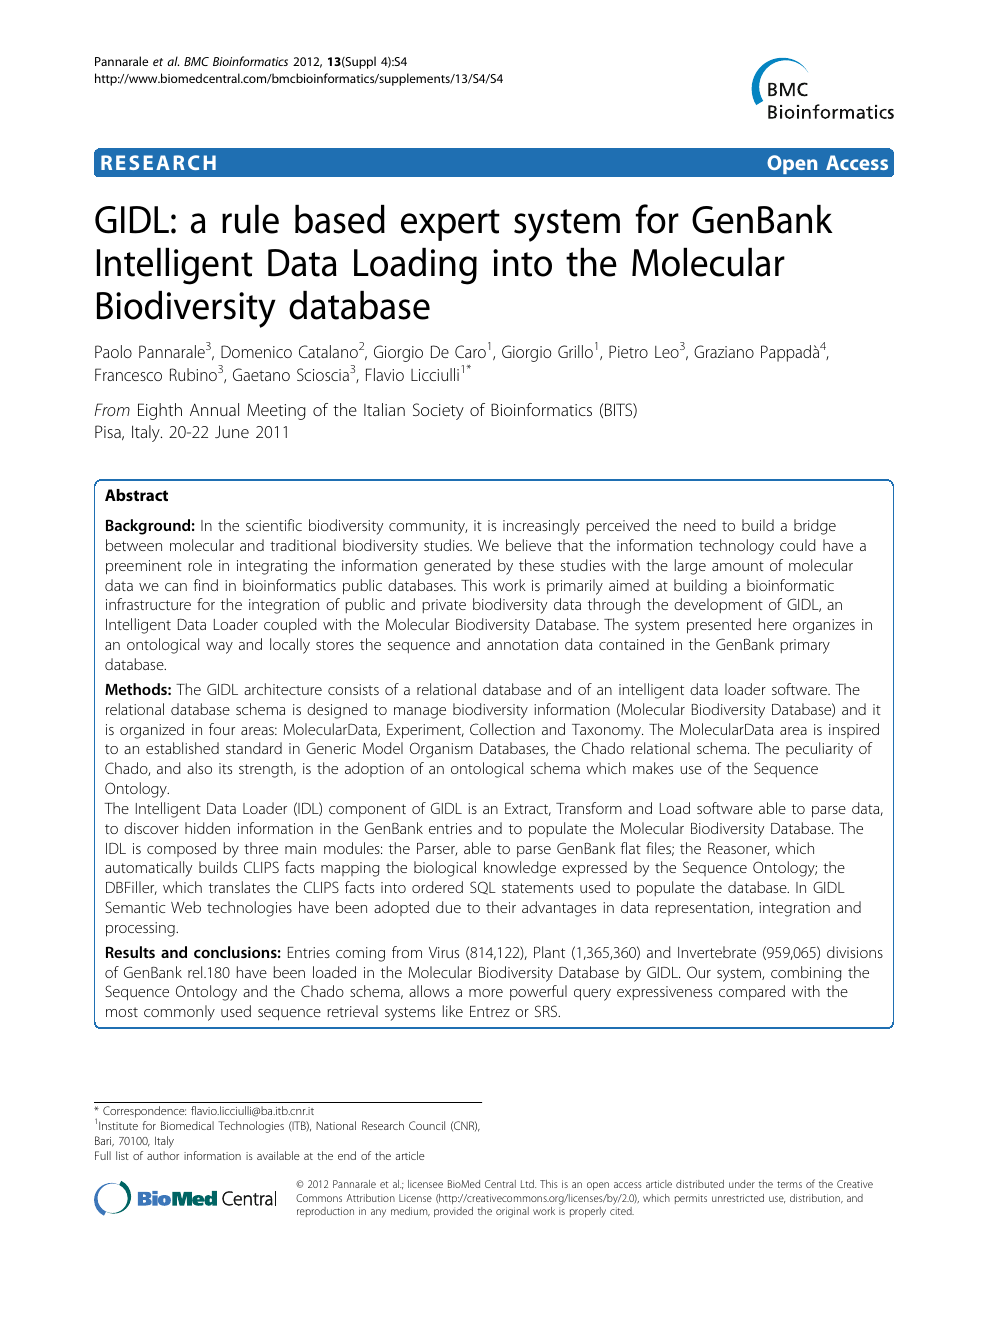 Gidl A Rule Based Expert System For Genbank Intelligent Data Images, Photos, Reviews